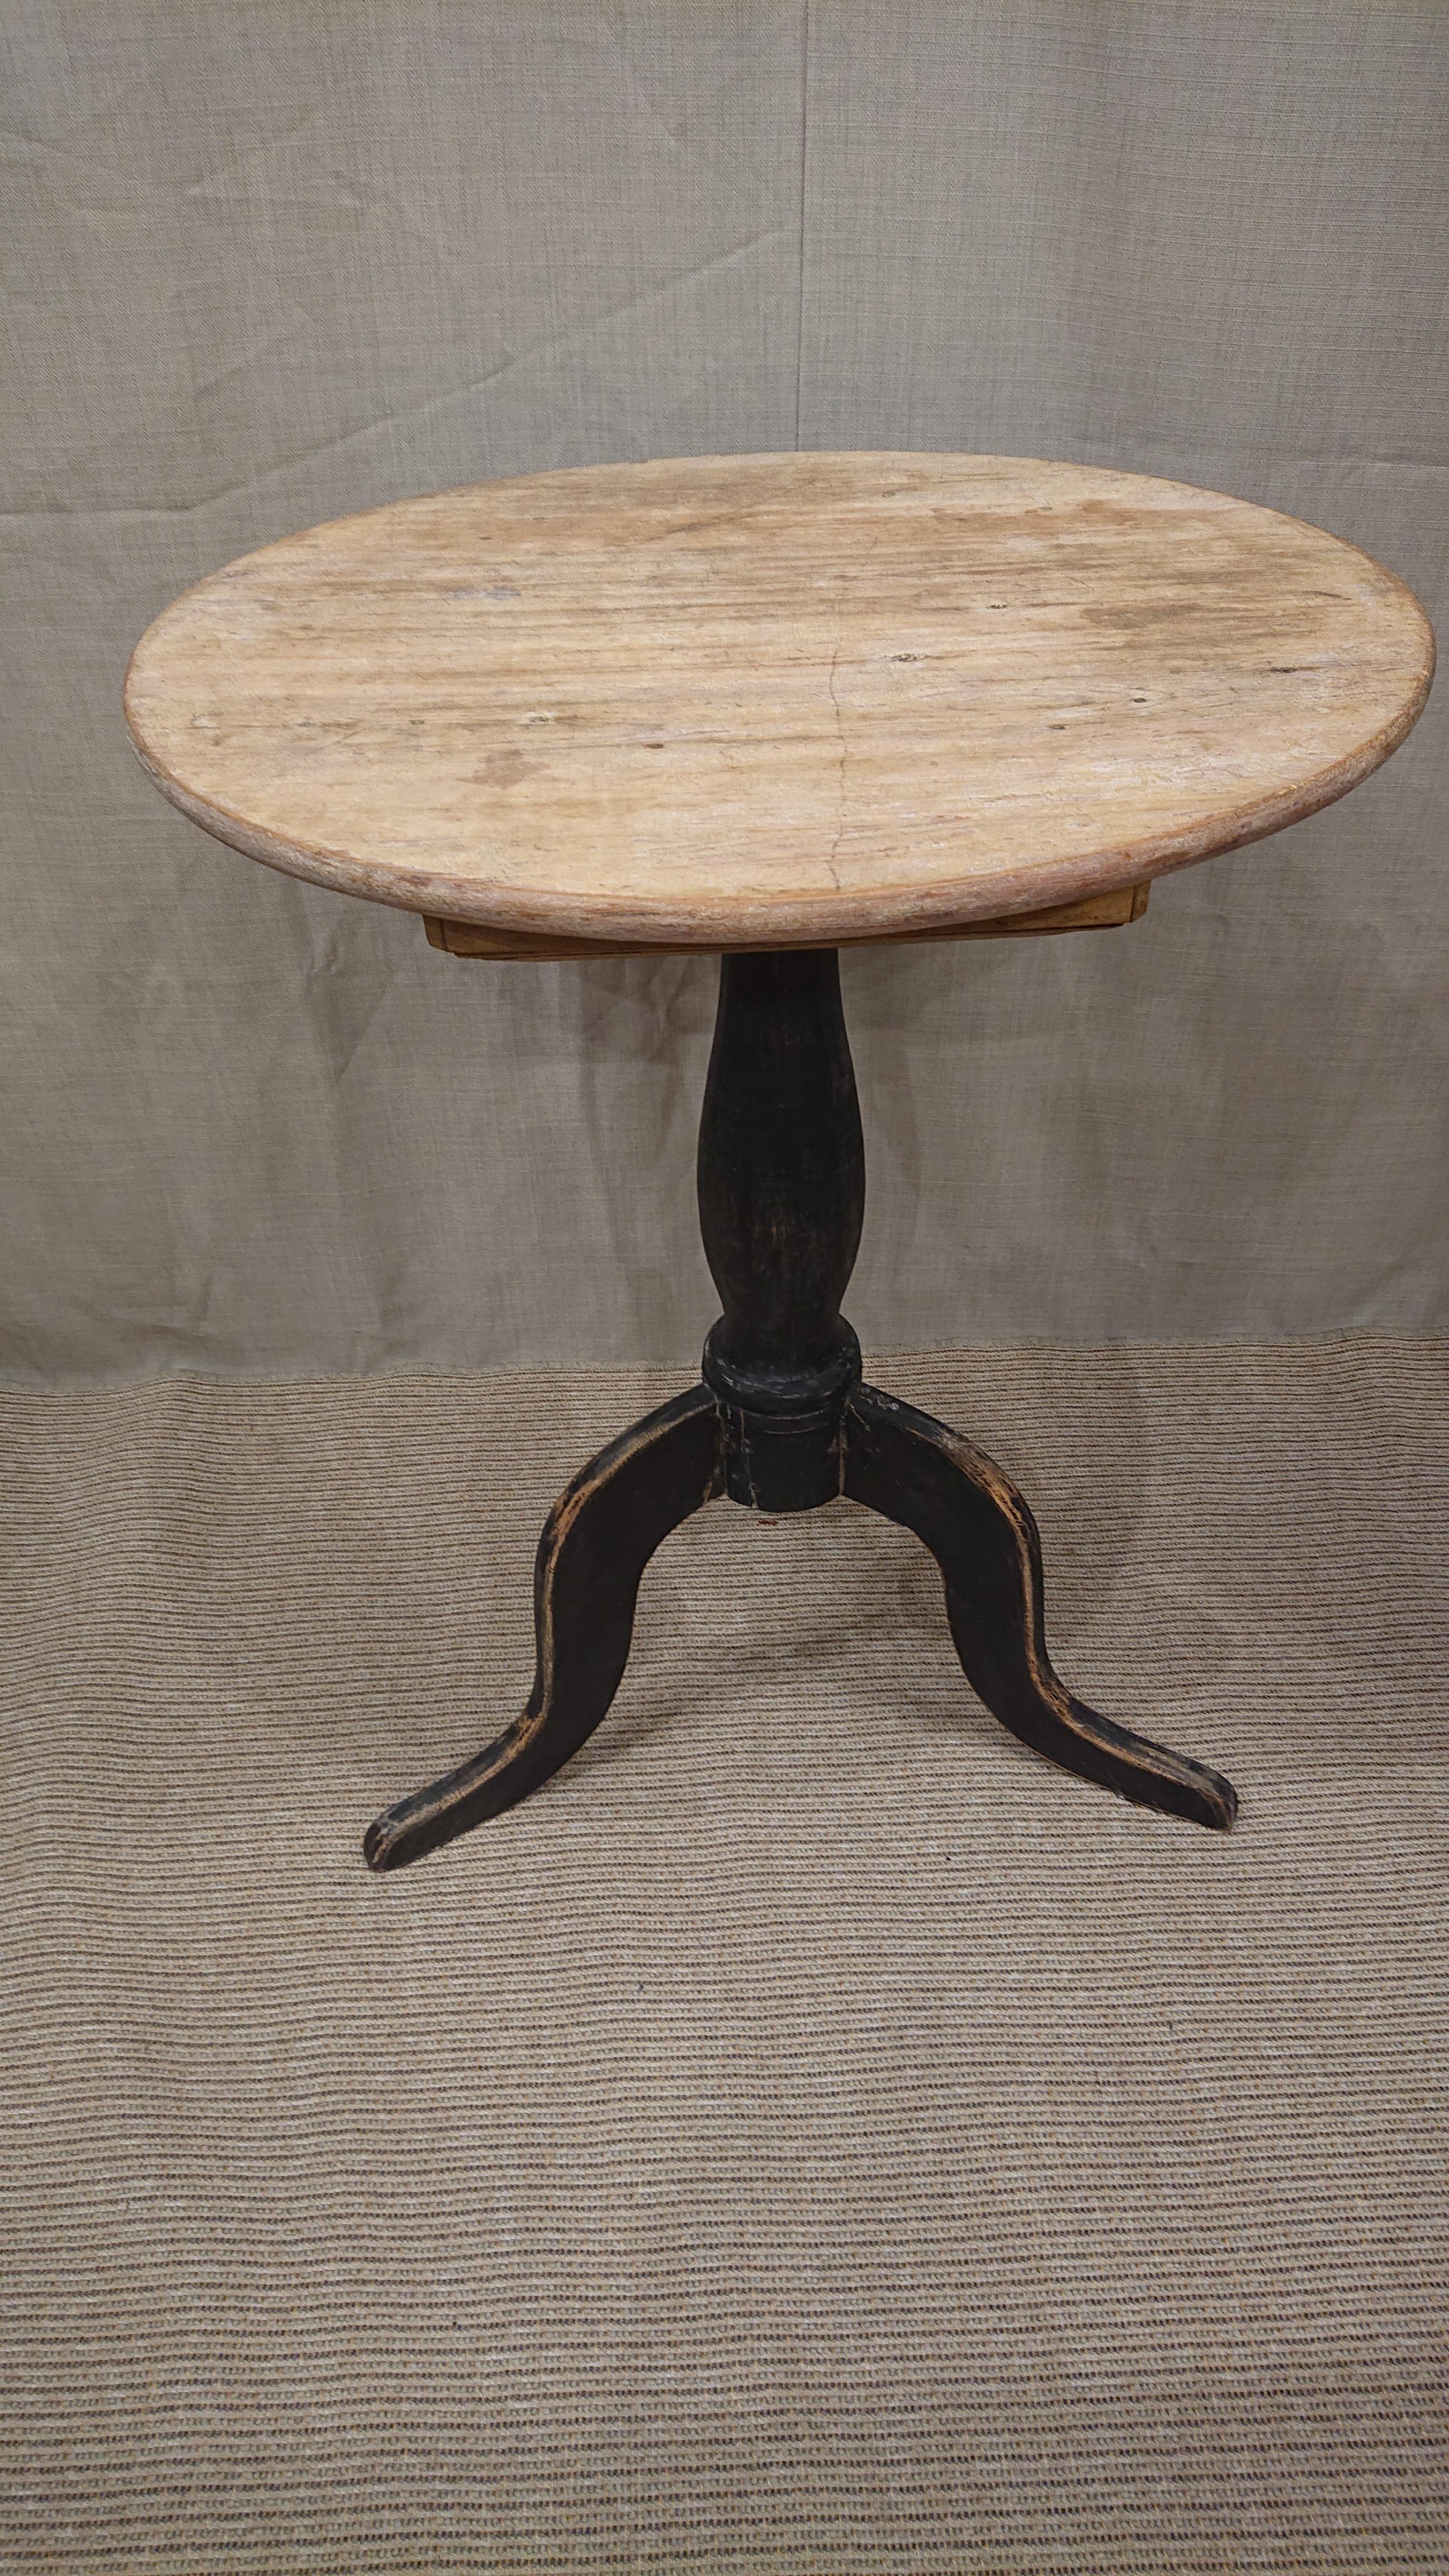 19th Century Swedish Empire Pedestal Table with Drawer & Original Paint For Sale 8